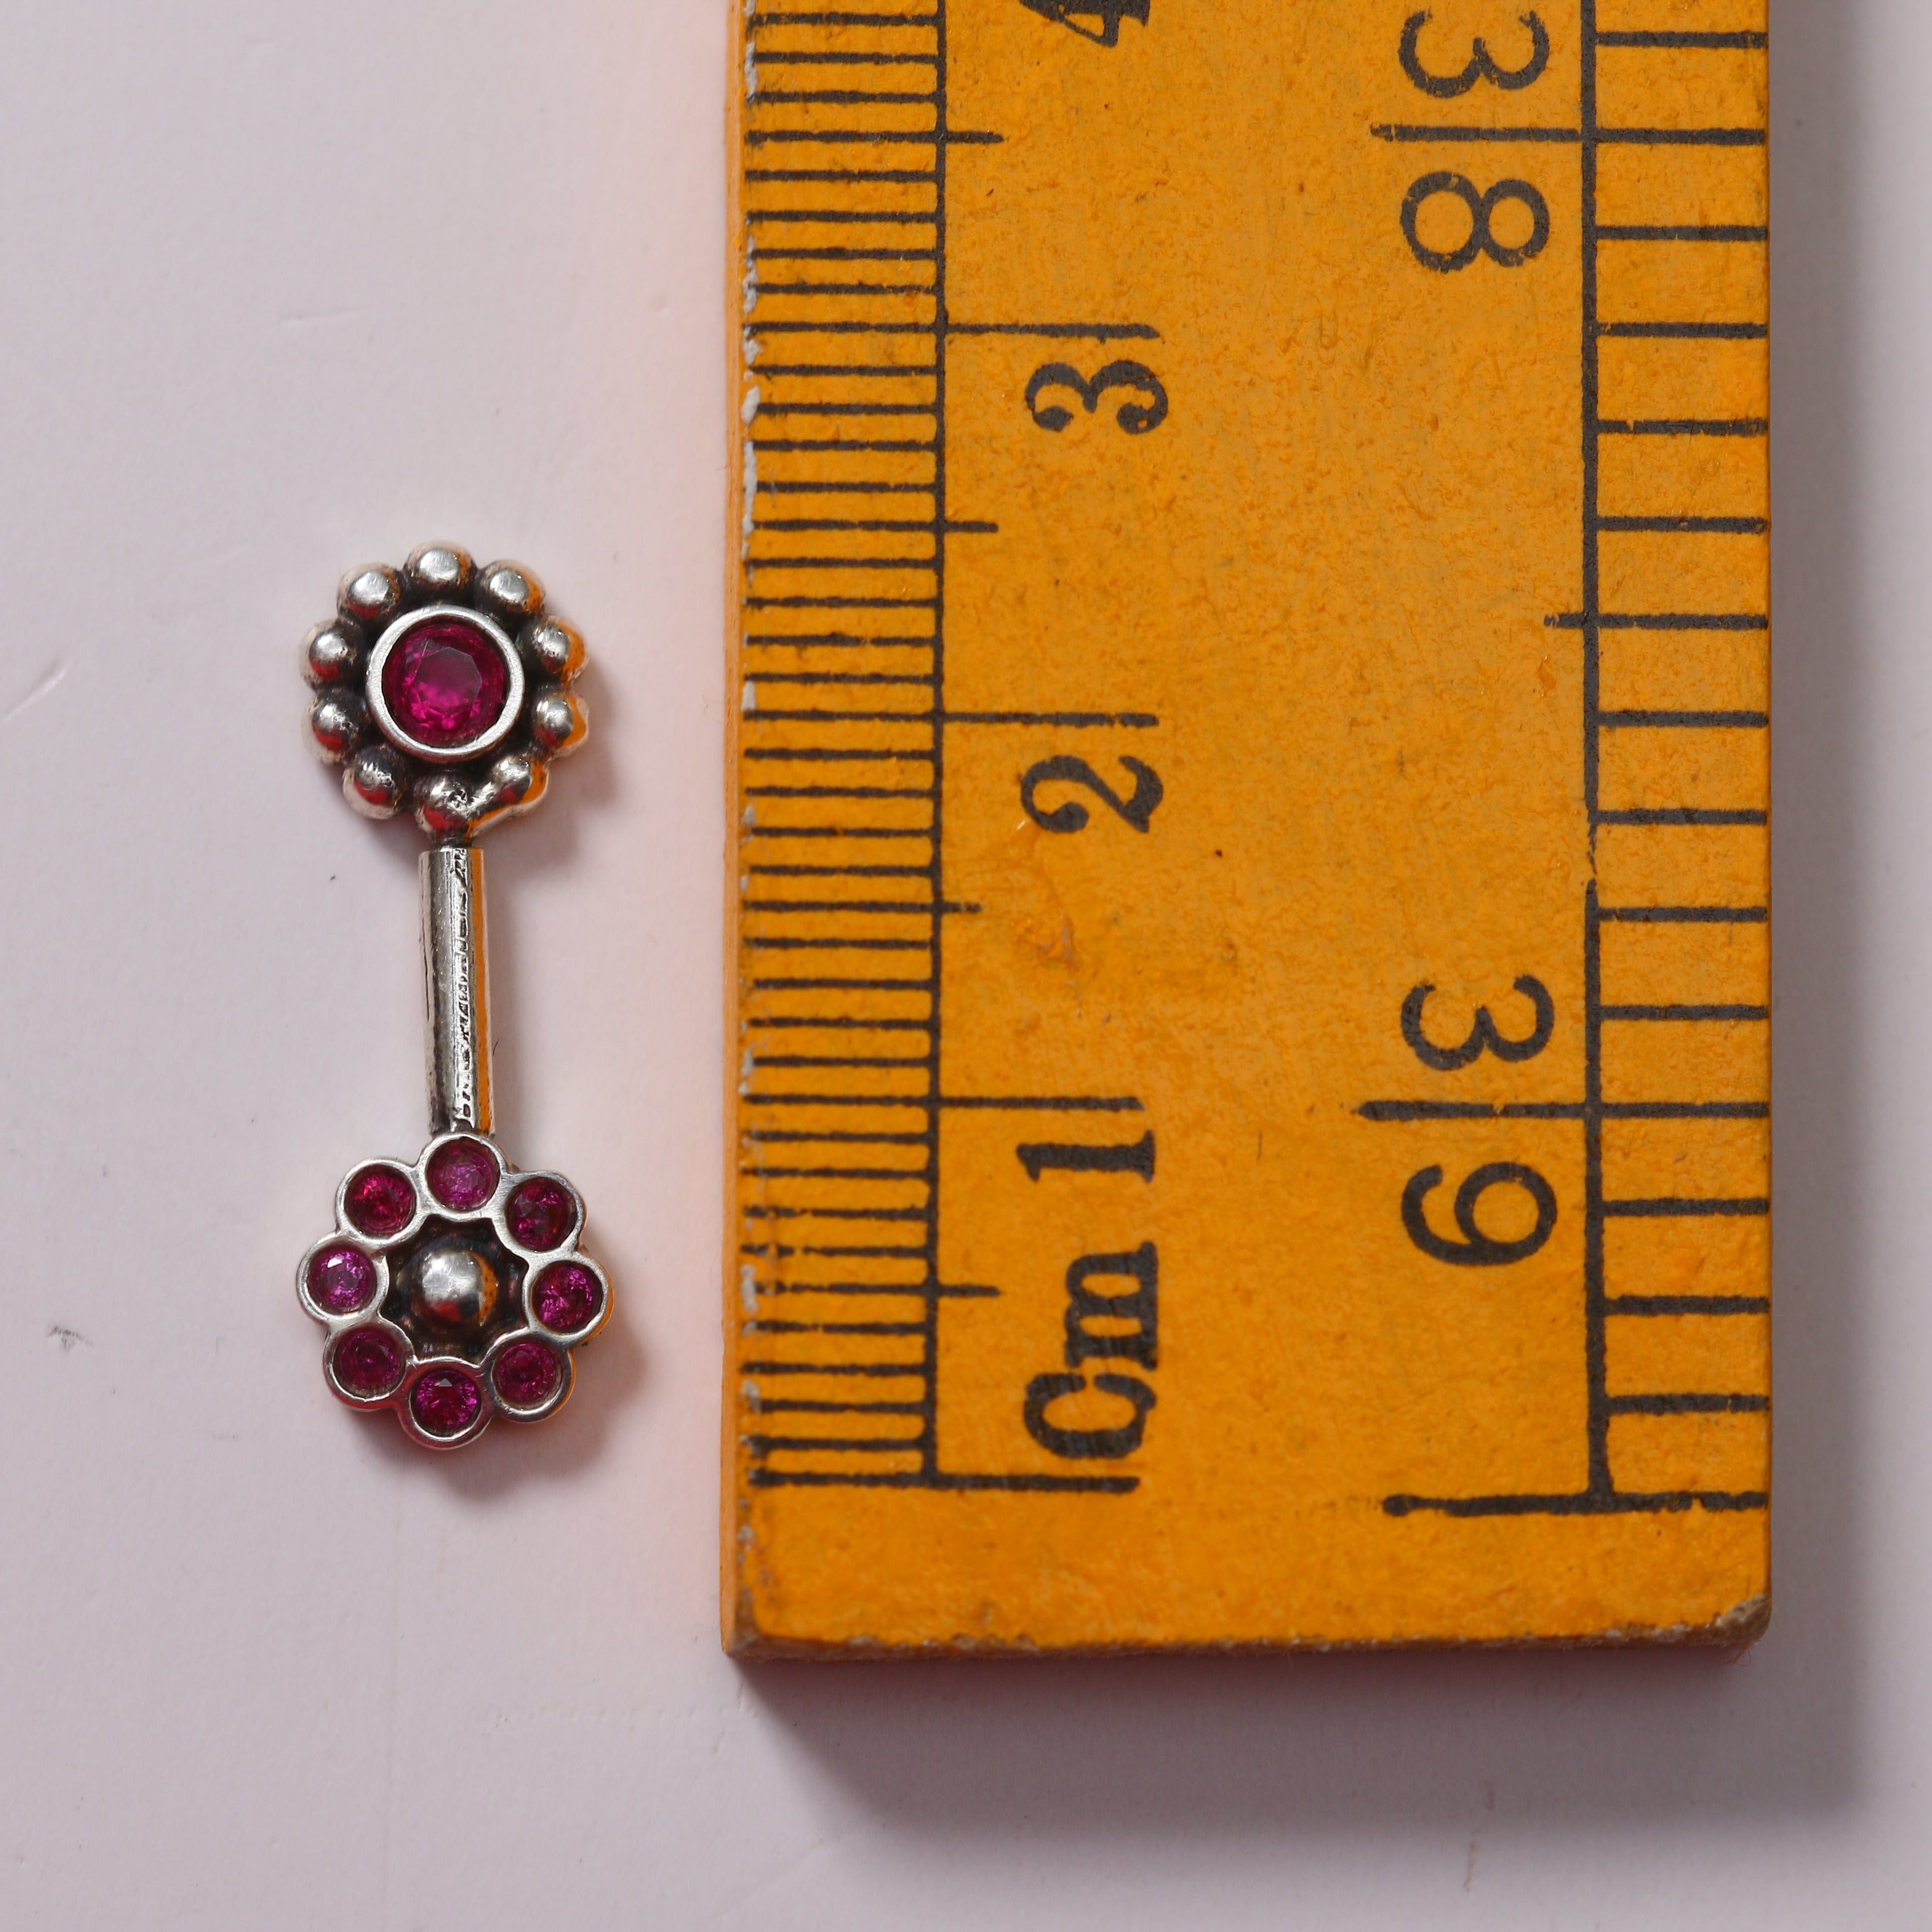 a pair of earrings sitting next to a ruler